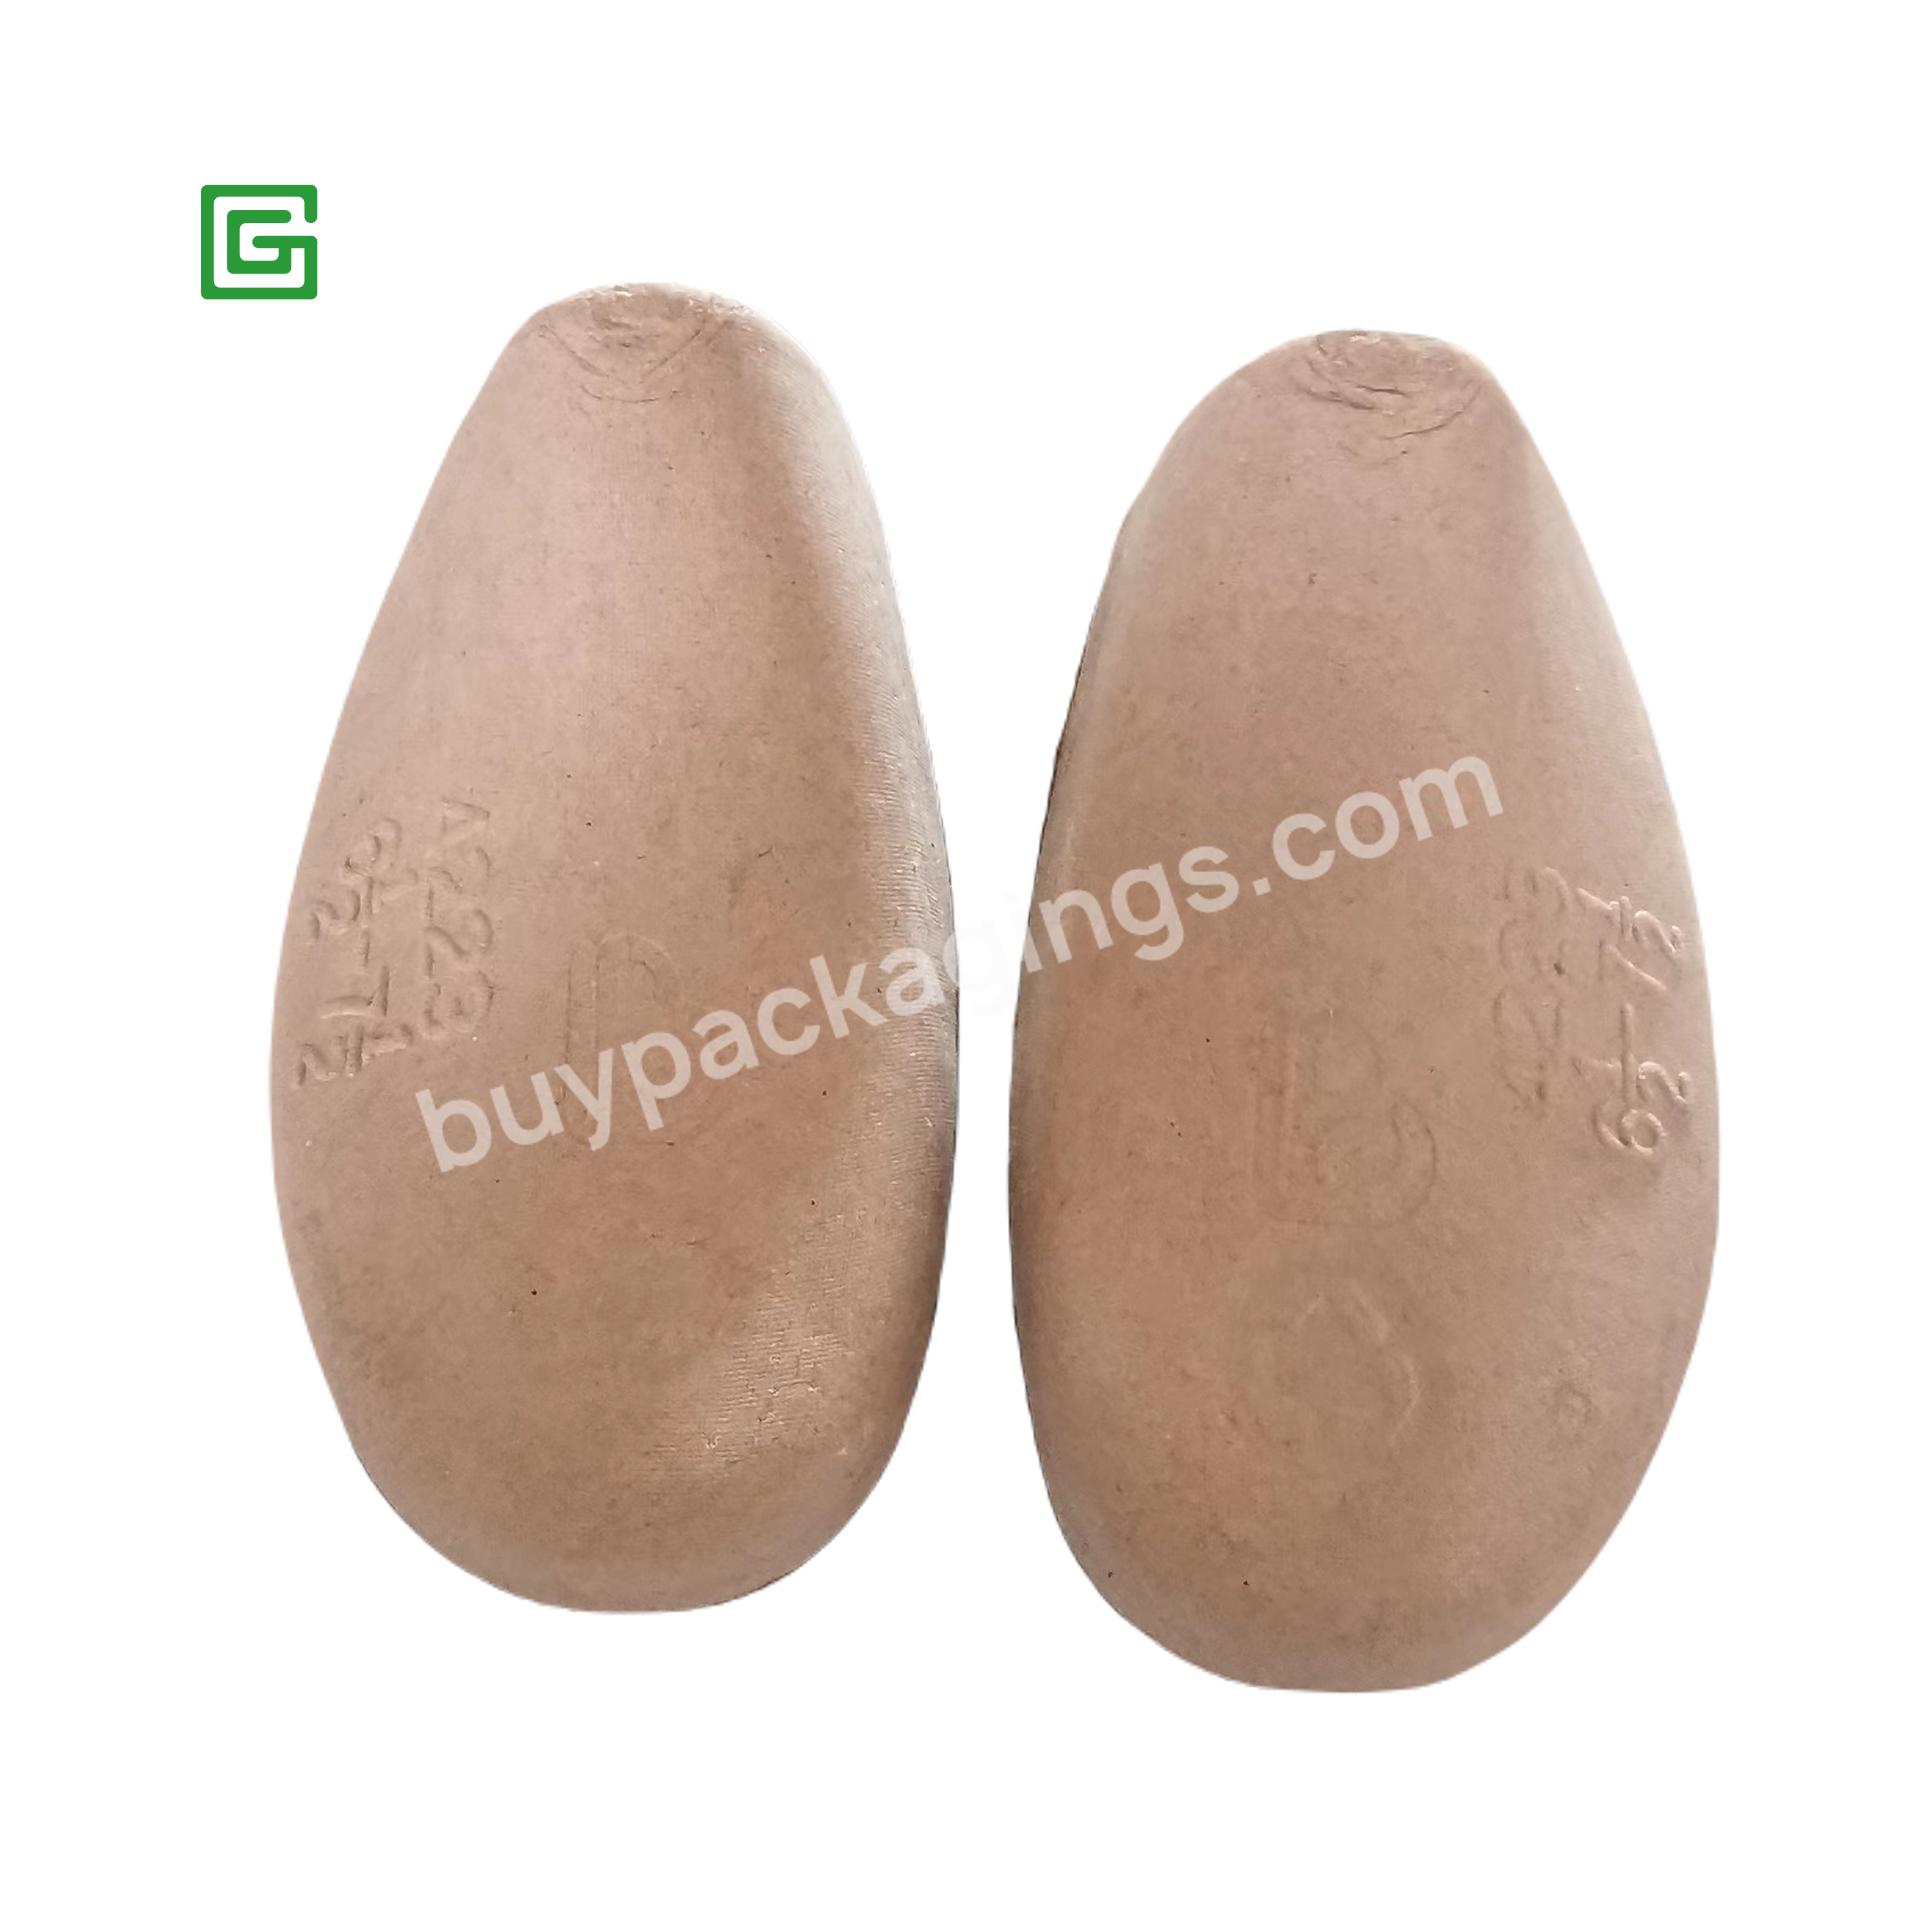 Wearable Shoe Filler Inserts Disposable Pulp Molded Paper Shoe Tree With Oem Logo - Buy Disposable Shoe Trees,Pulp Molded Paper Shoe Tree,Shoe Filler.